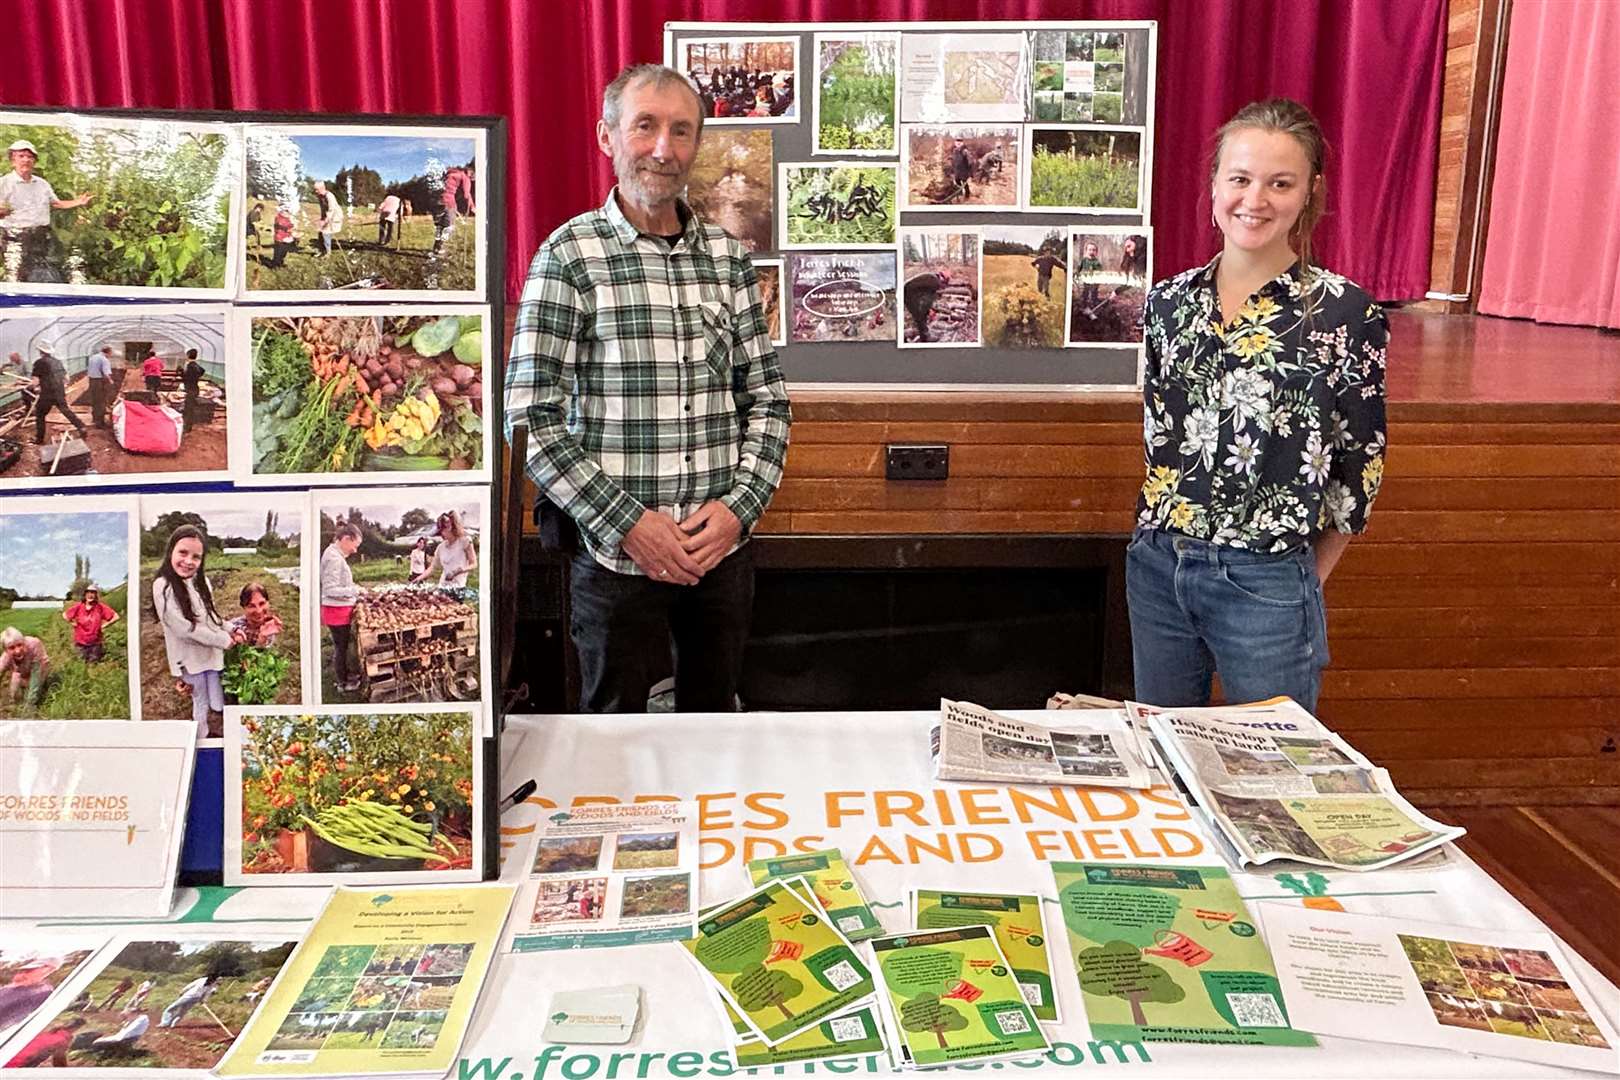 Forres Friends of Woods and Fields were represented at the community marketplace. Picture: Louise Nicol